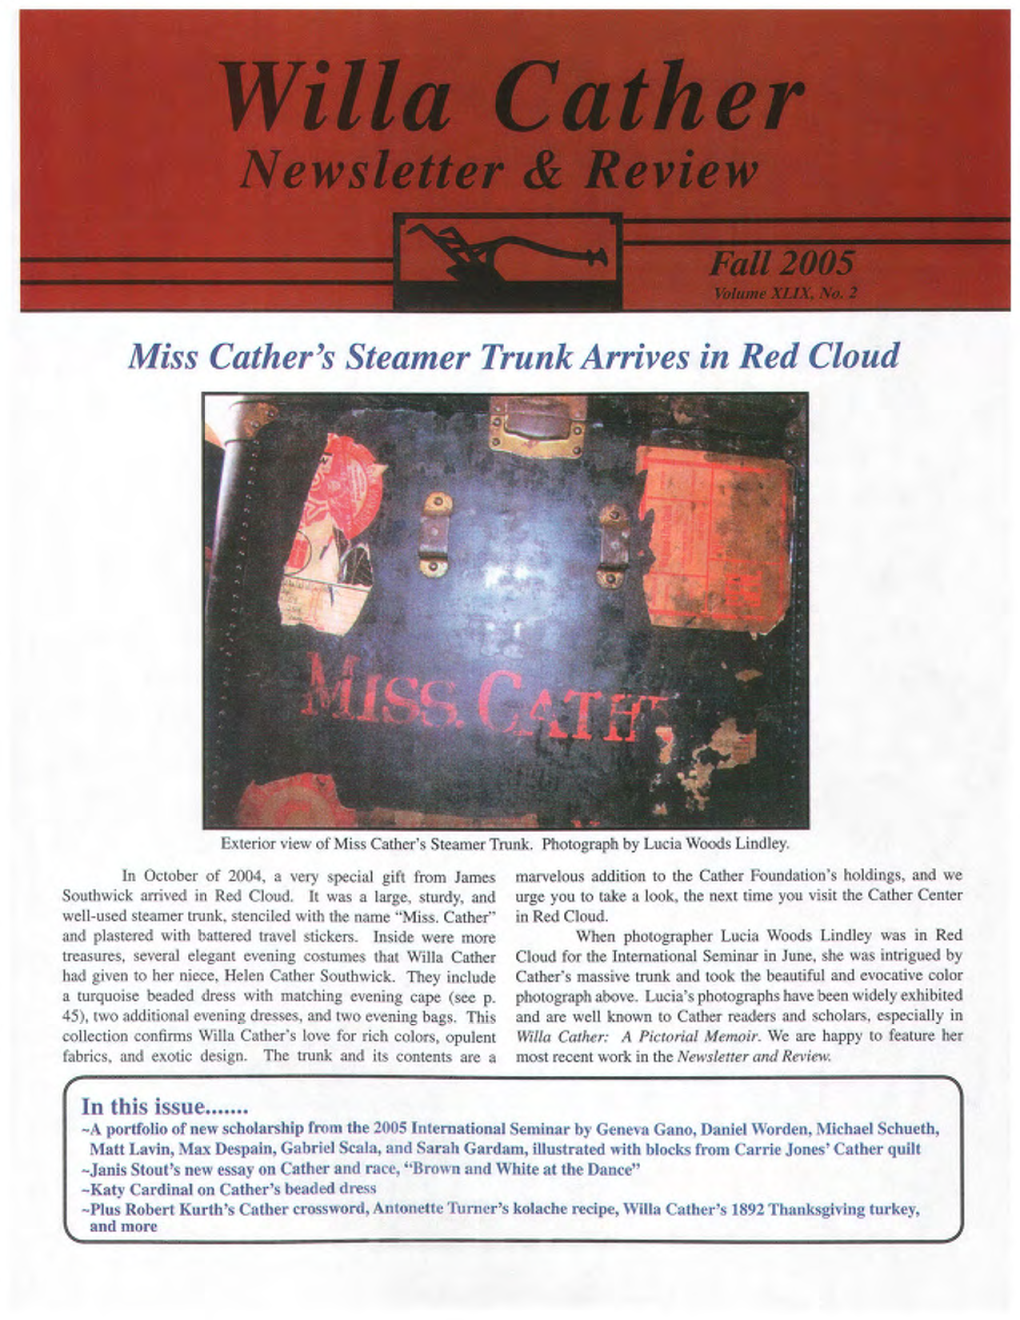 Miss Cather's Steamer Trunk Arrives in Red Cloud